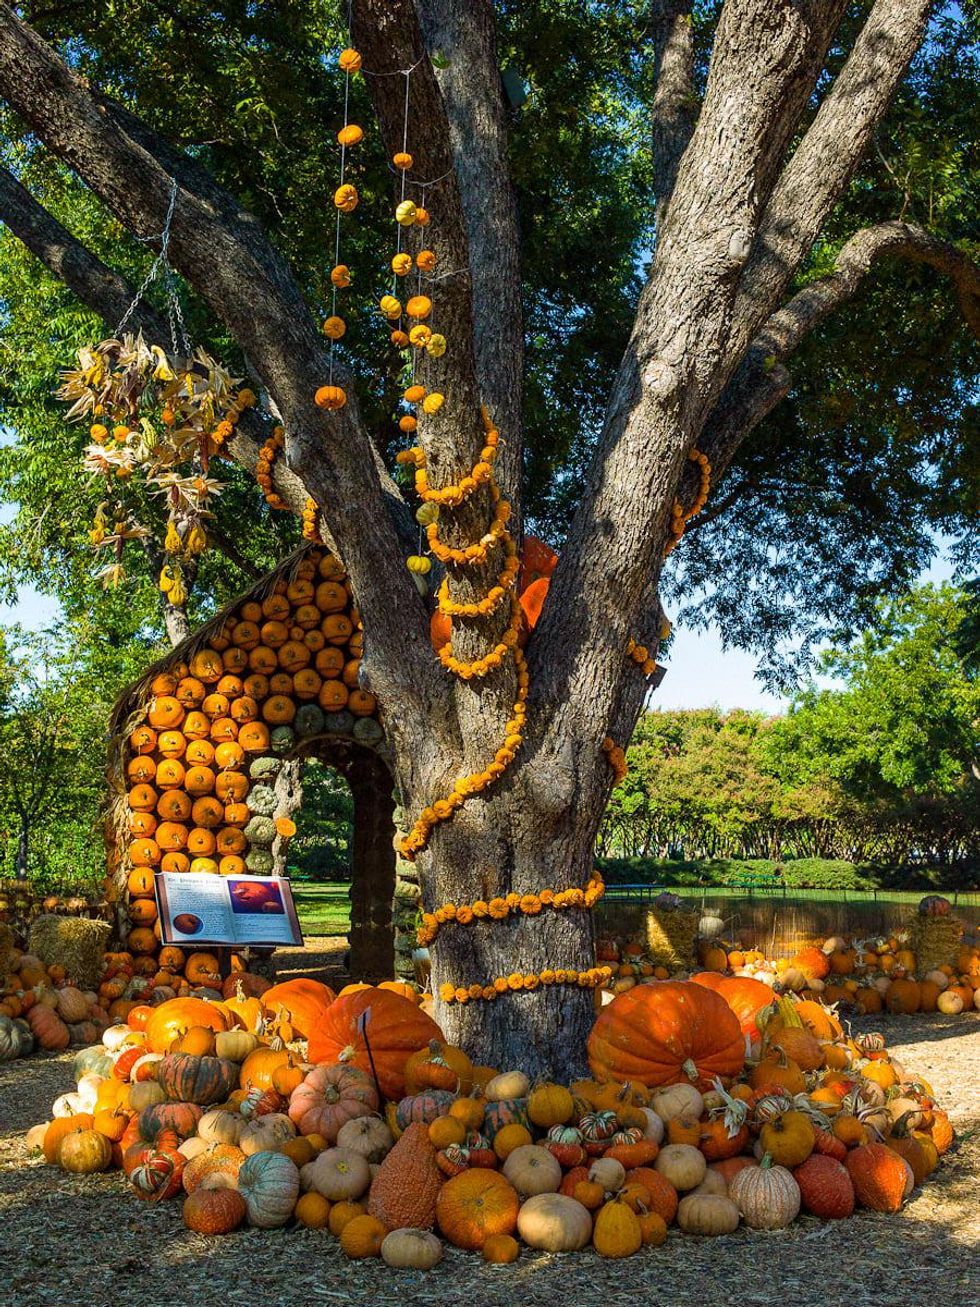 A fall mustsee Chihuly glass and pumpkin patch at the Dallas